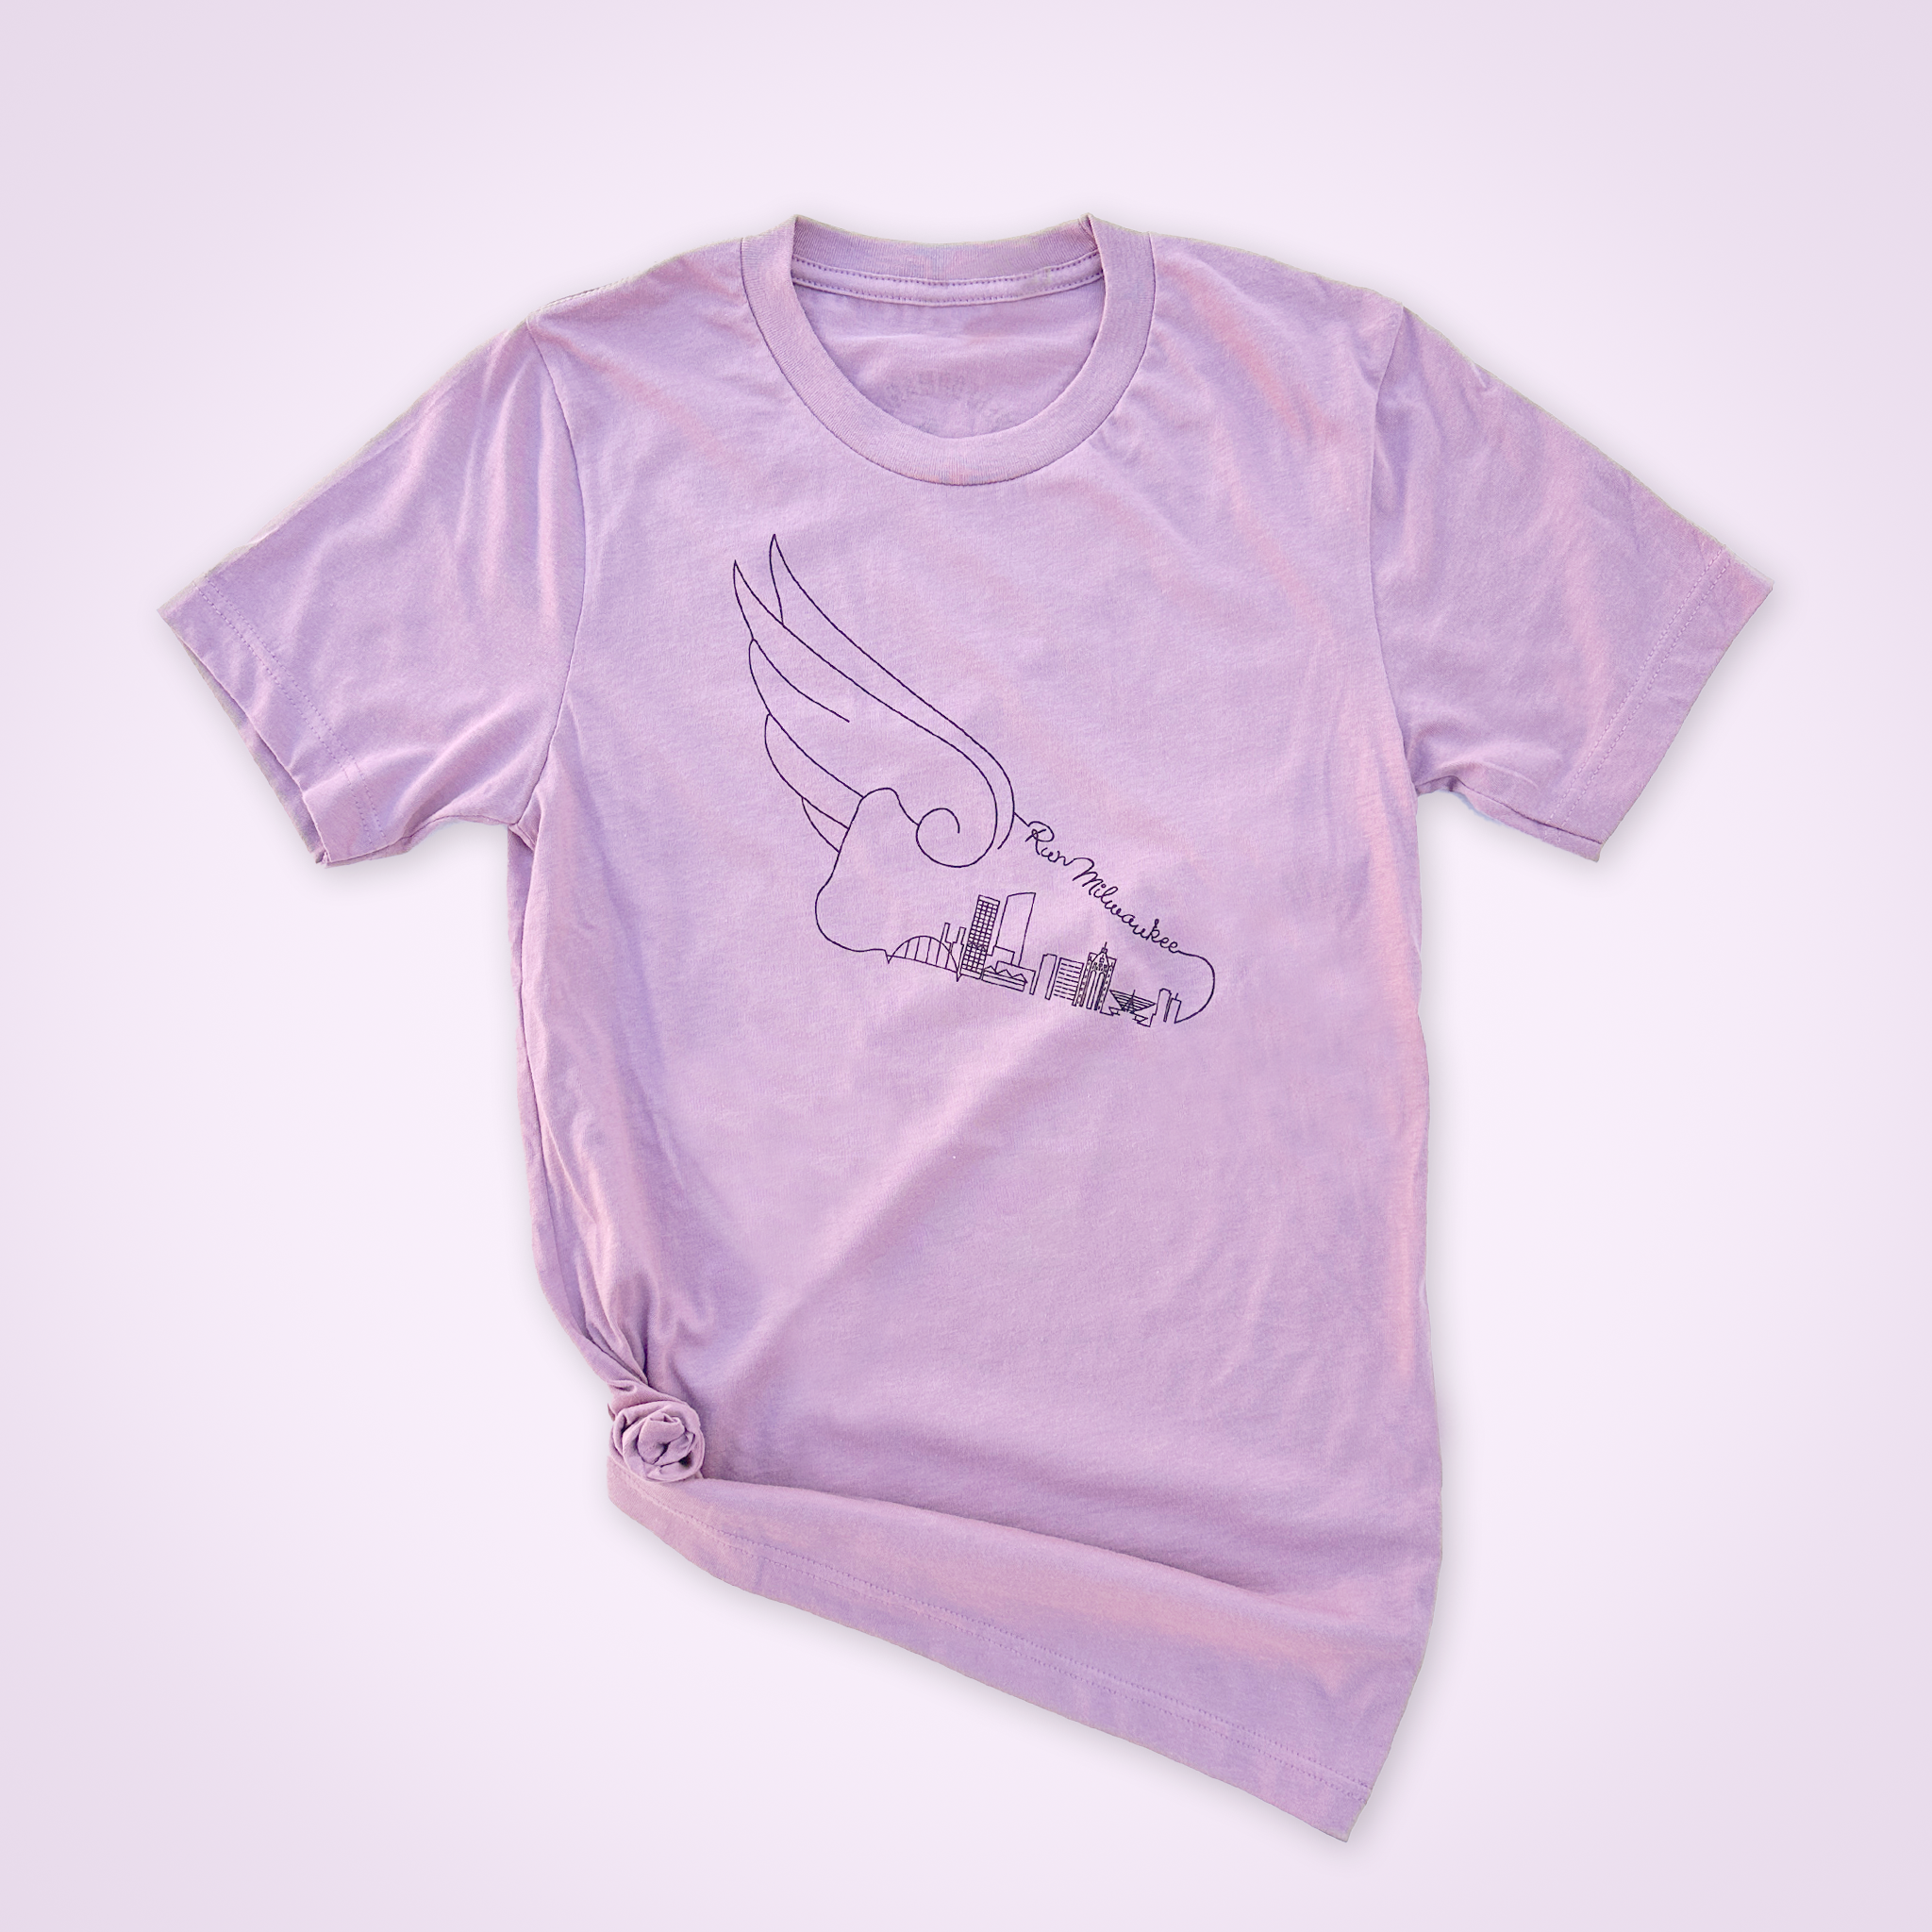 ORCHARD STREET PRESS WOMEN'S PRO MKE WING TEE - ORCHID S